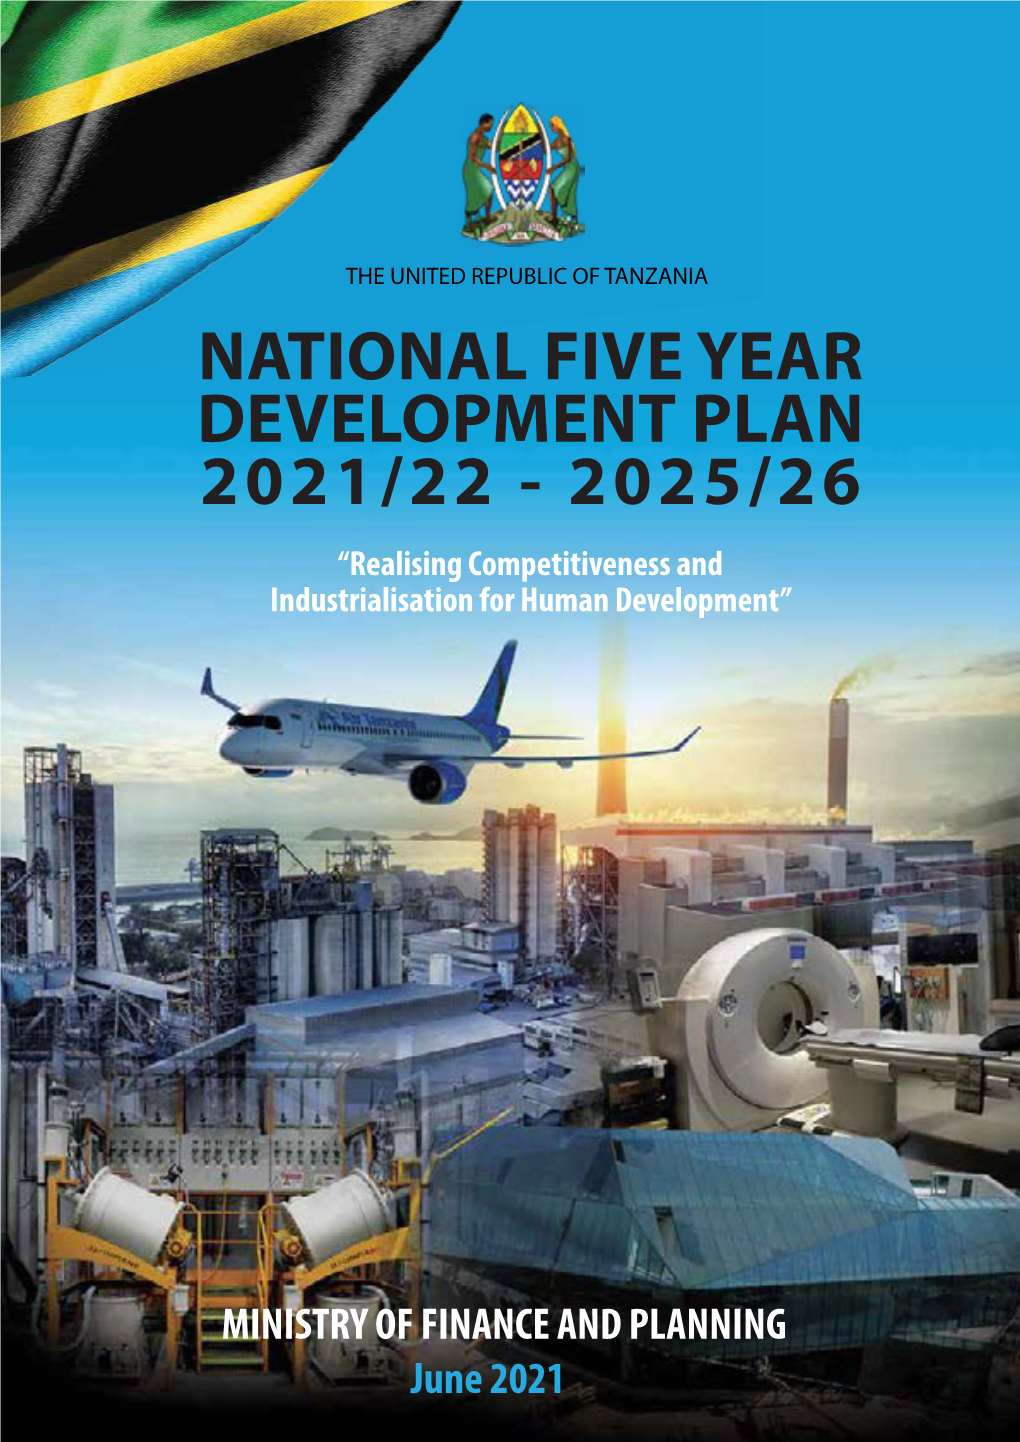 NATIONAL FIVE YEAR DEVELOPMENT PLAN 2021/22 - 2025/26 “Realising Competitiveness and Industrialisation for Human Development”